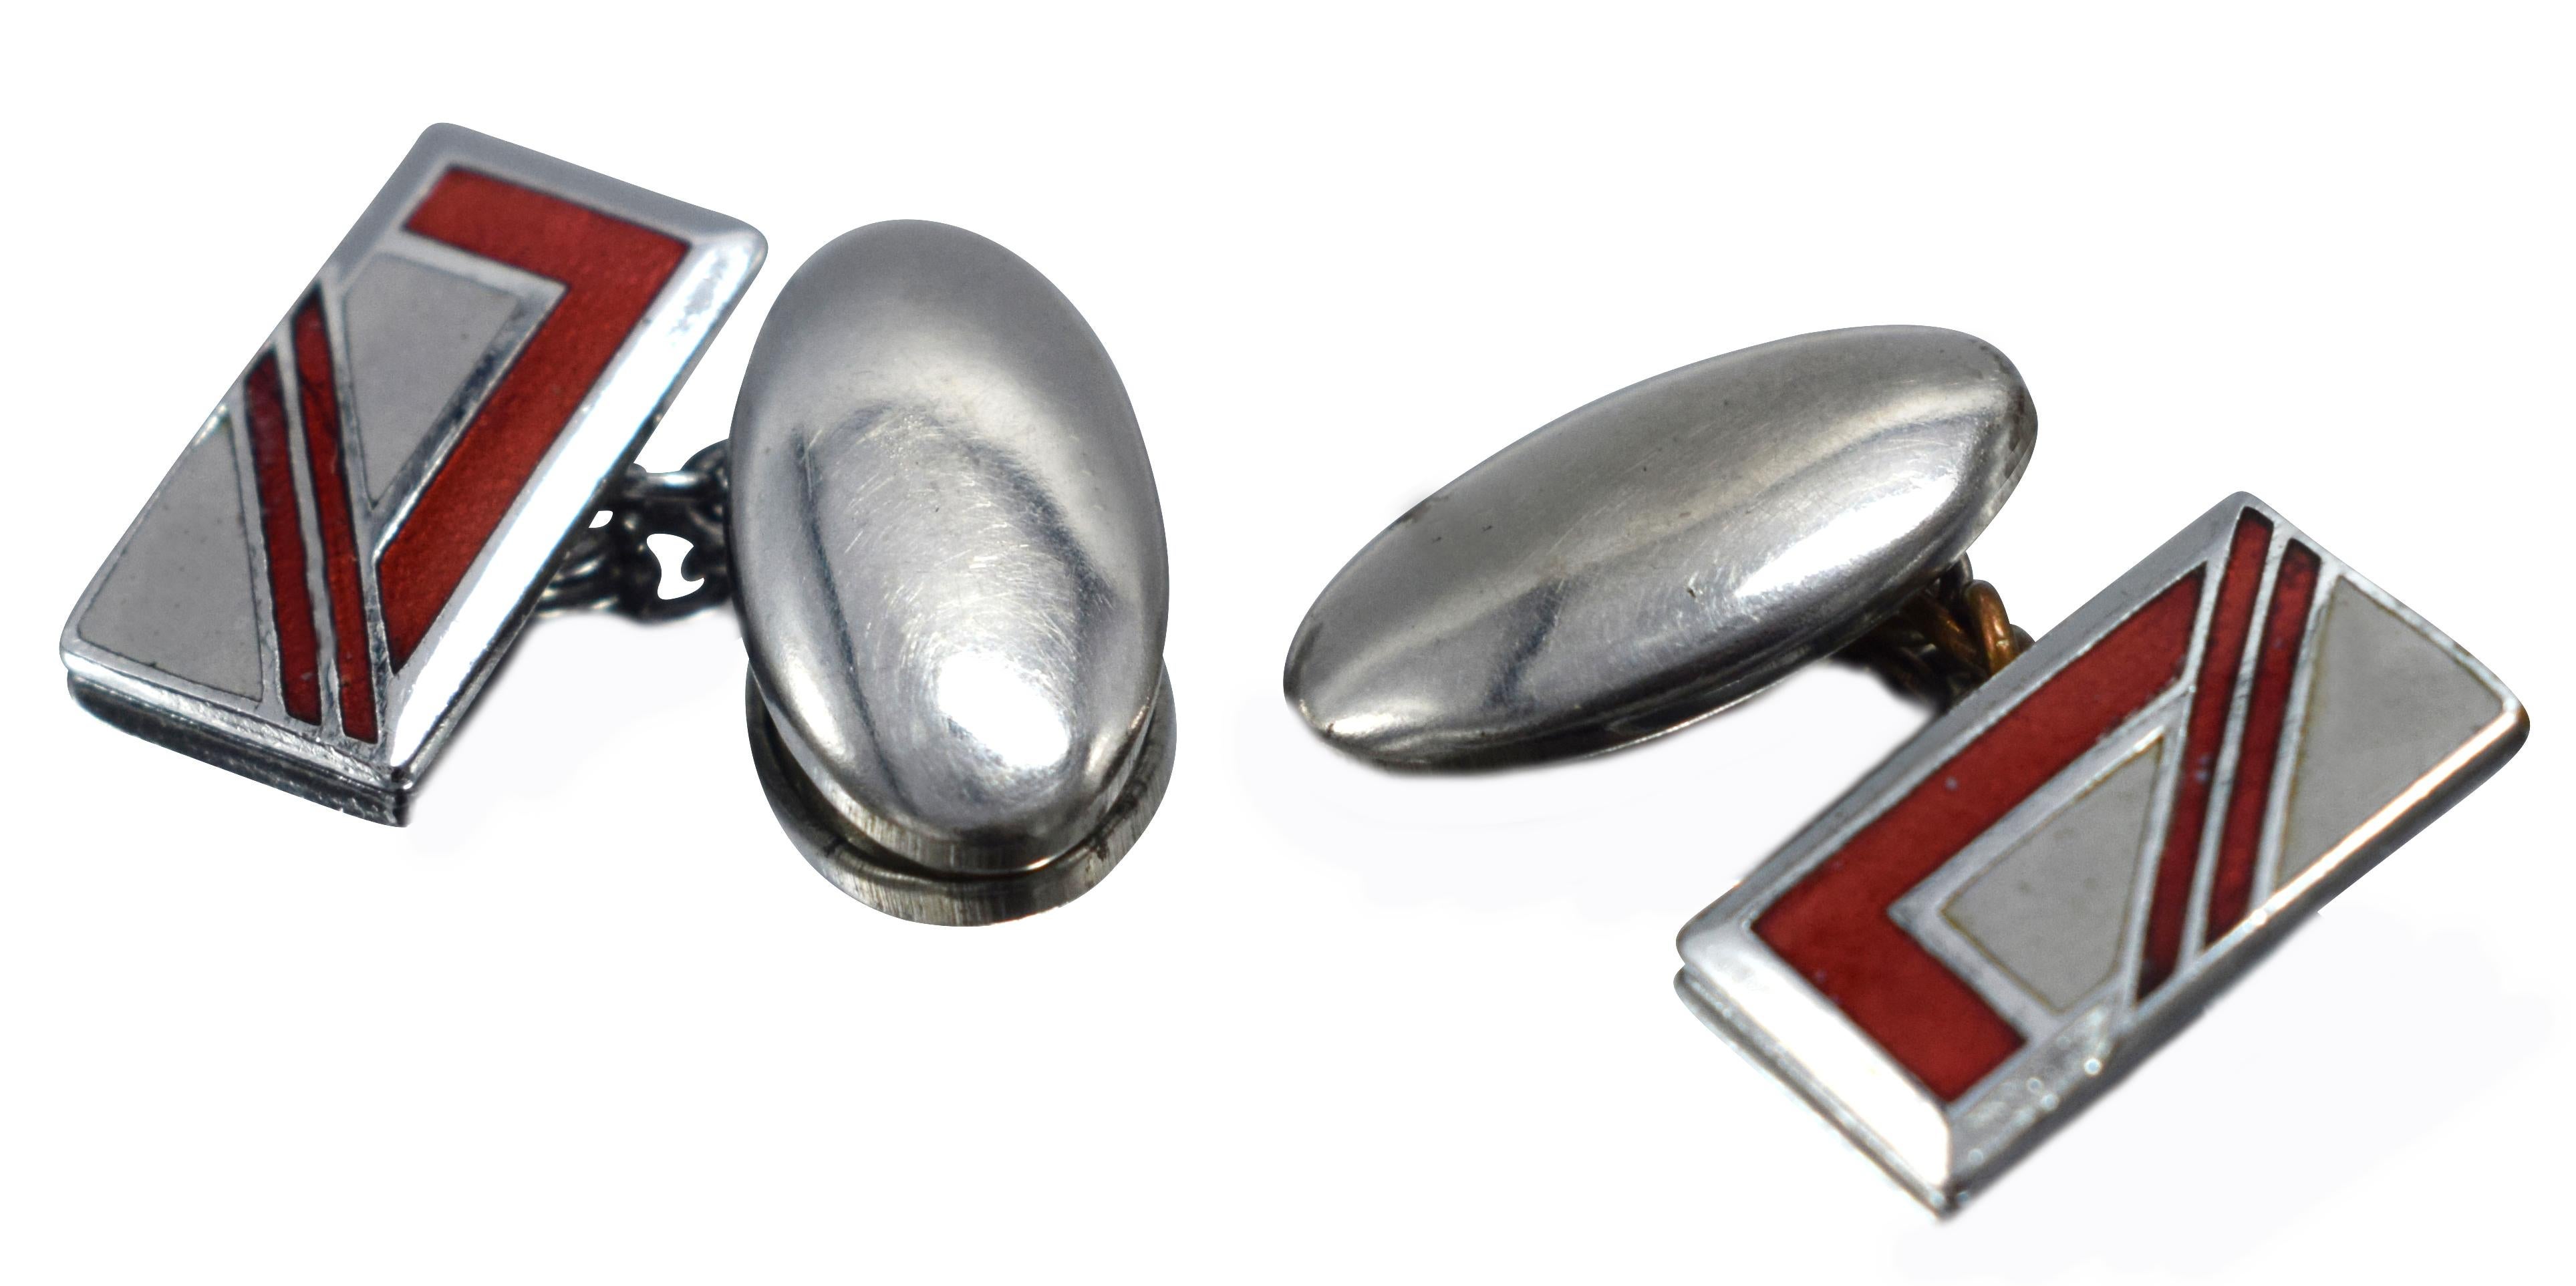 Fabulous pair of matching Art Deco men’s cufflinks with a great geometric pattern. Silver toned metal with red enamel decoration and dating to the 1930's make this links very distinctive and stylish. Ideal for the modern day dapper gentleman.